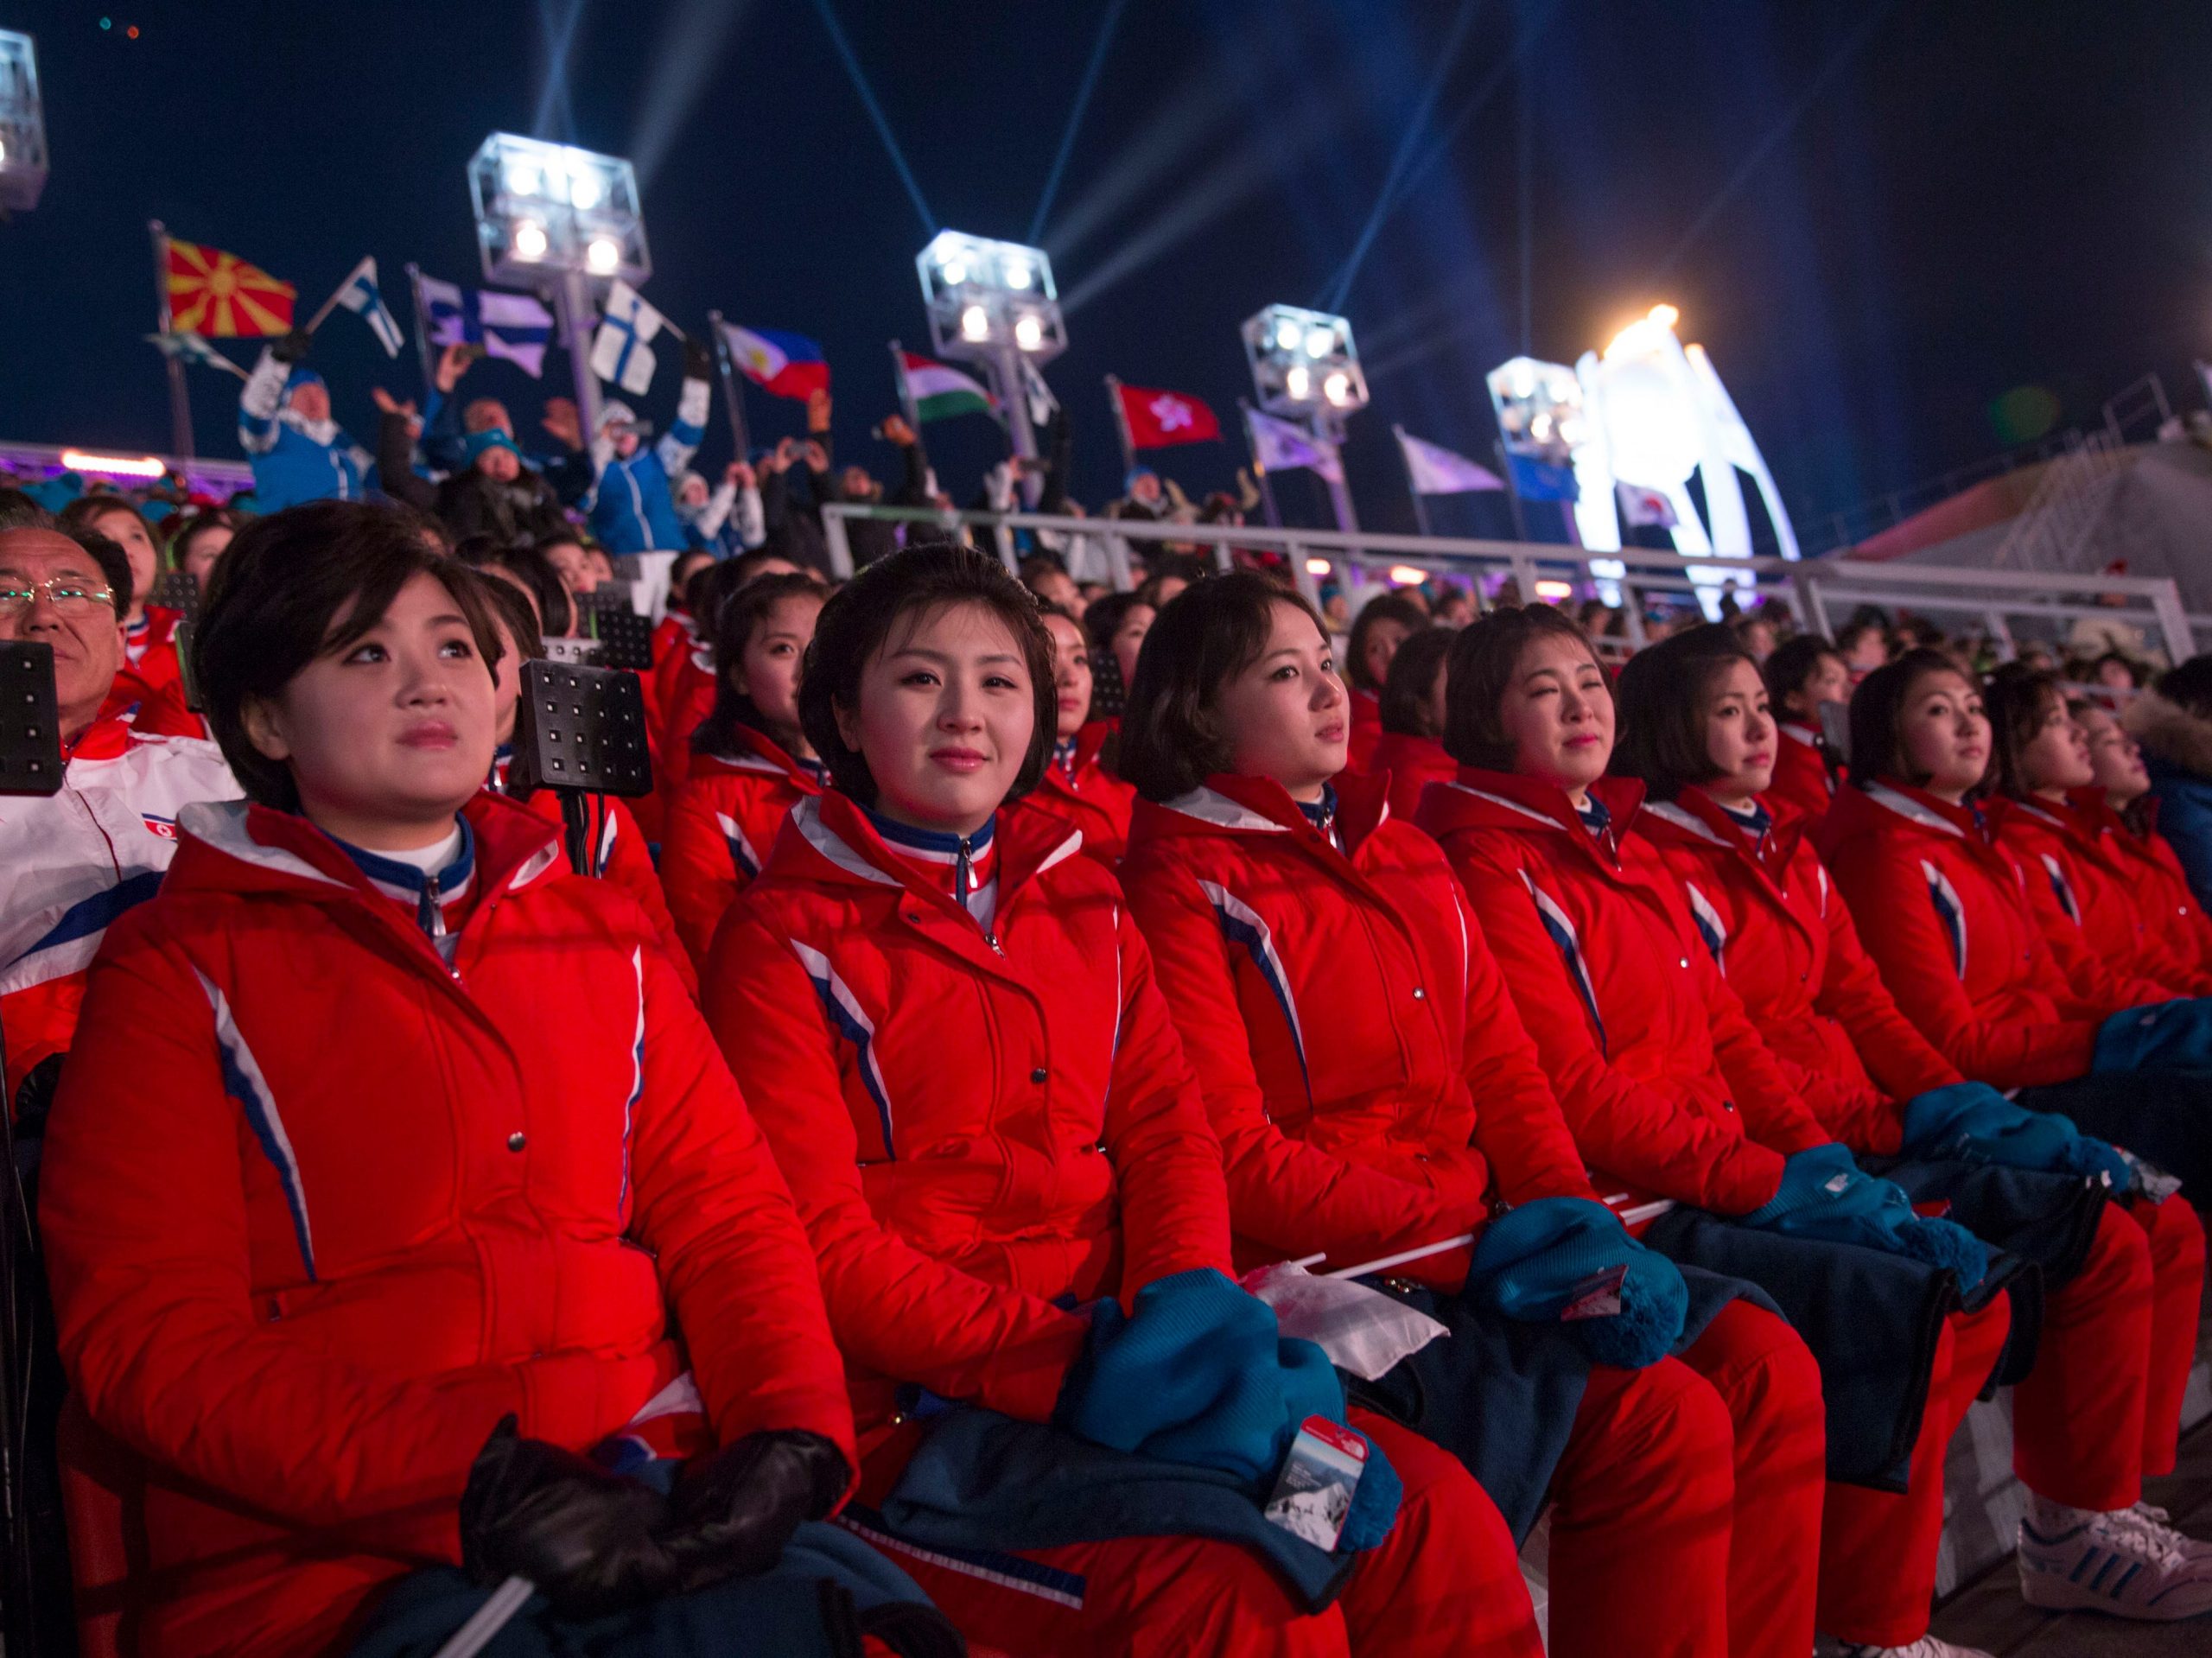 Spectators from the Democratic People's Republic of Korea at the 2018 Winter Olympic Games Closing Ceremony at Pyeongchang Olympic Stadium on February 25, 2018, in Pyeongchang, South Korea